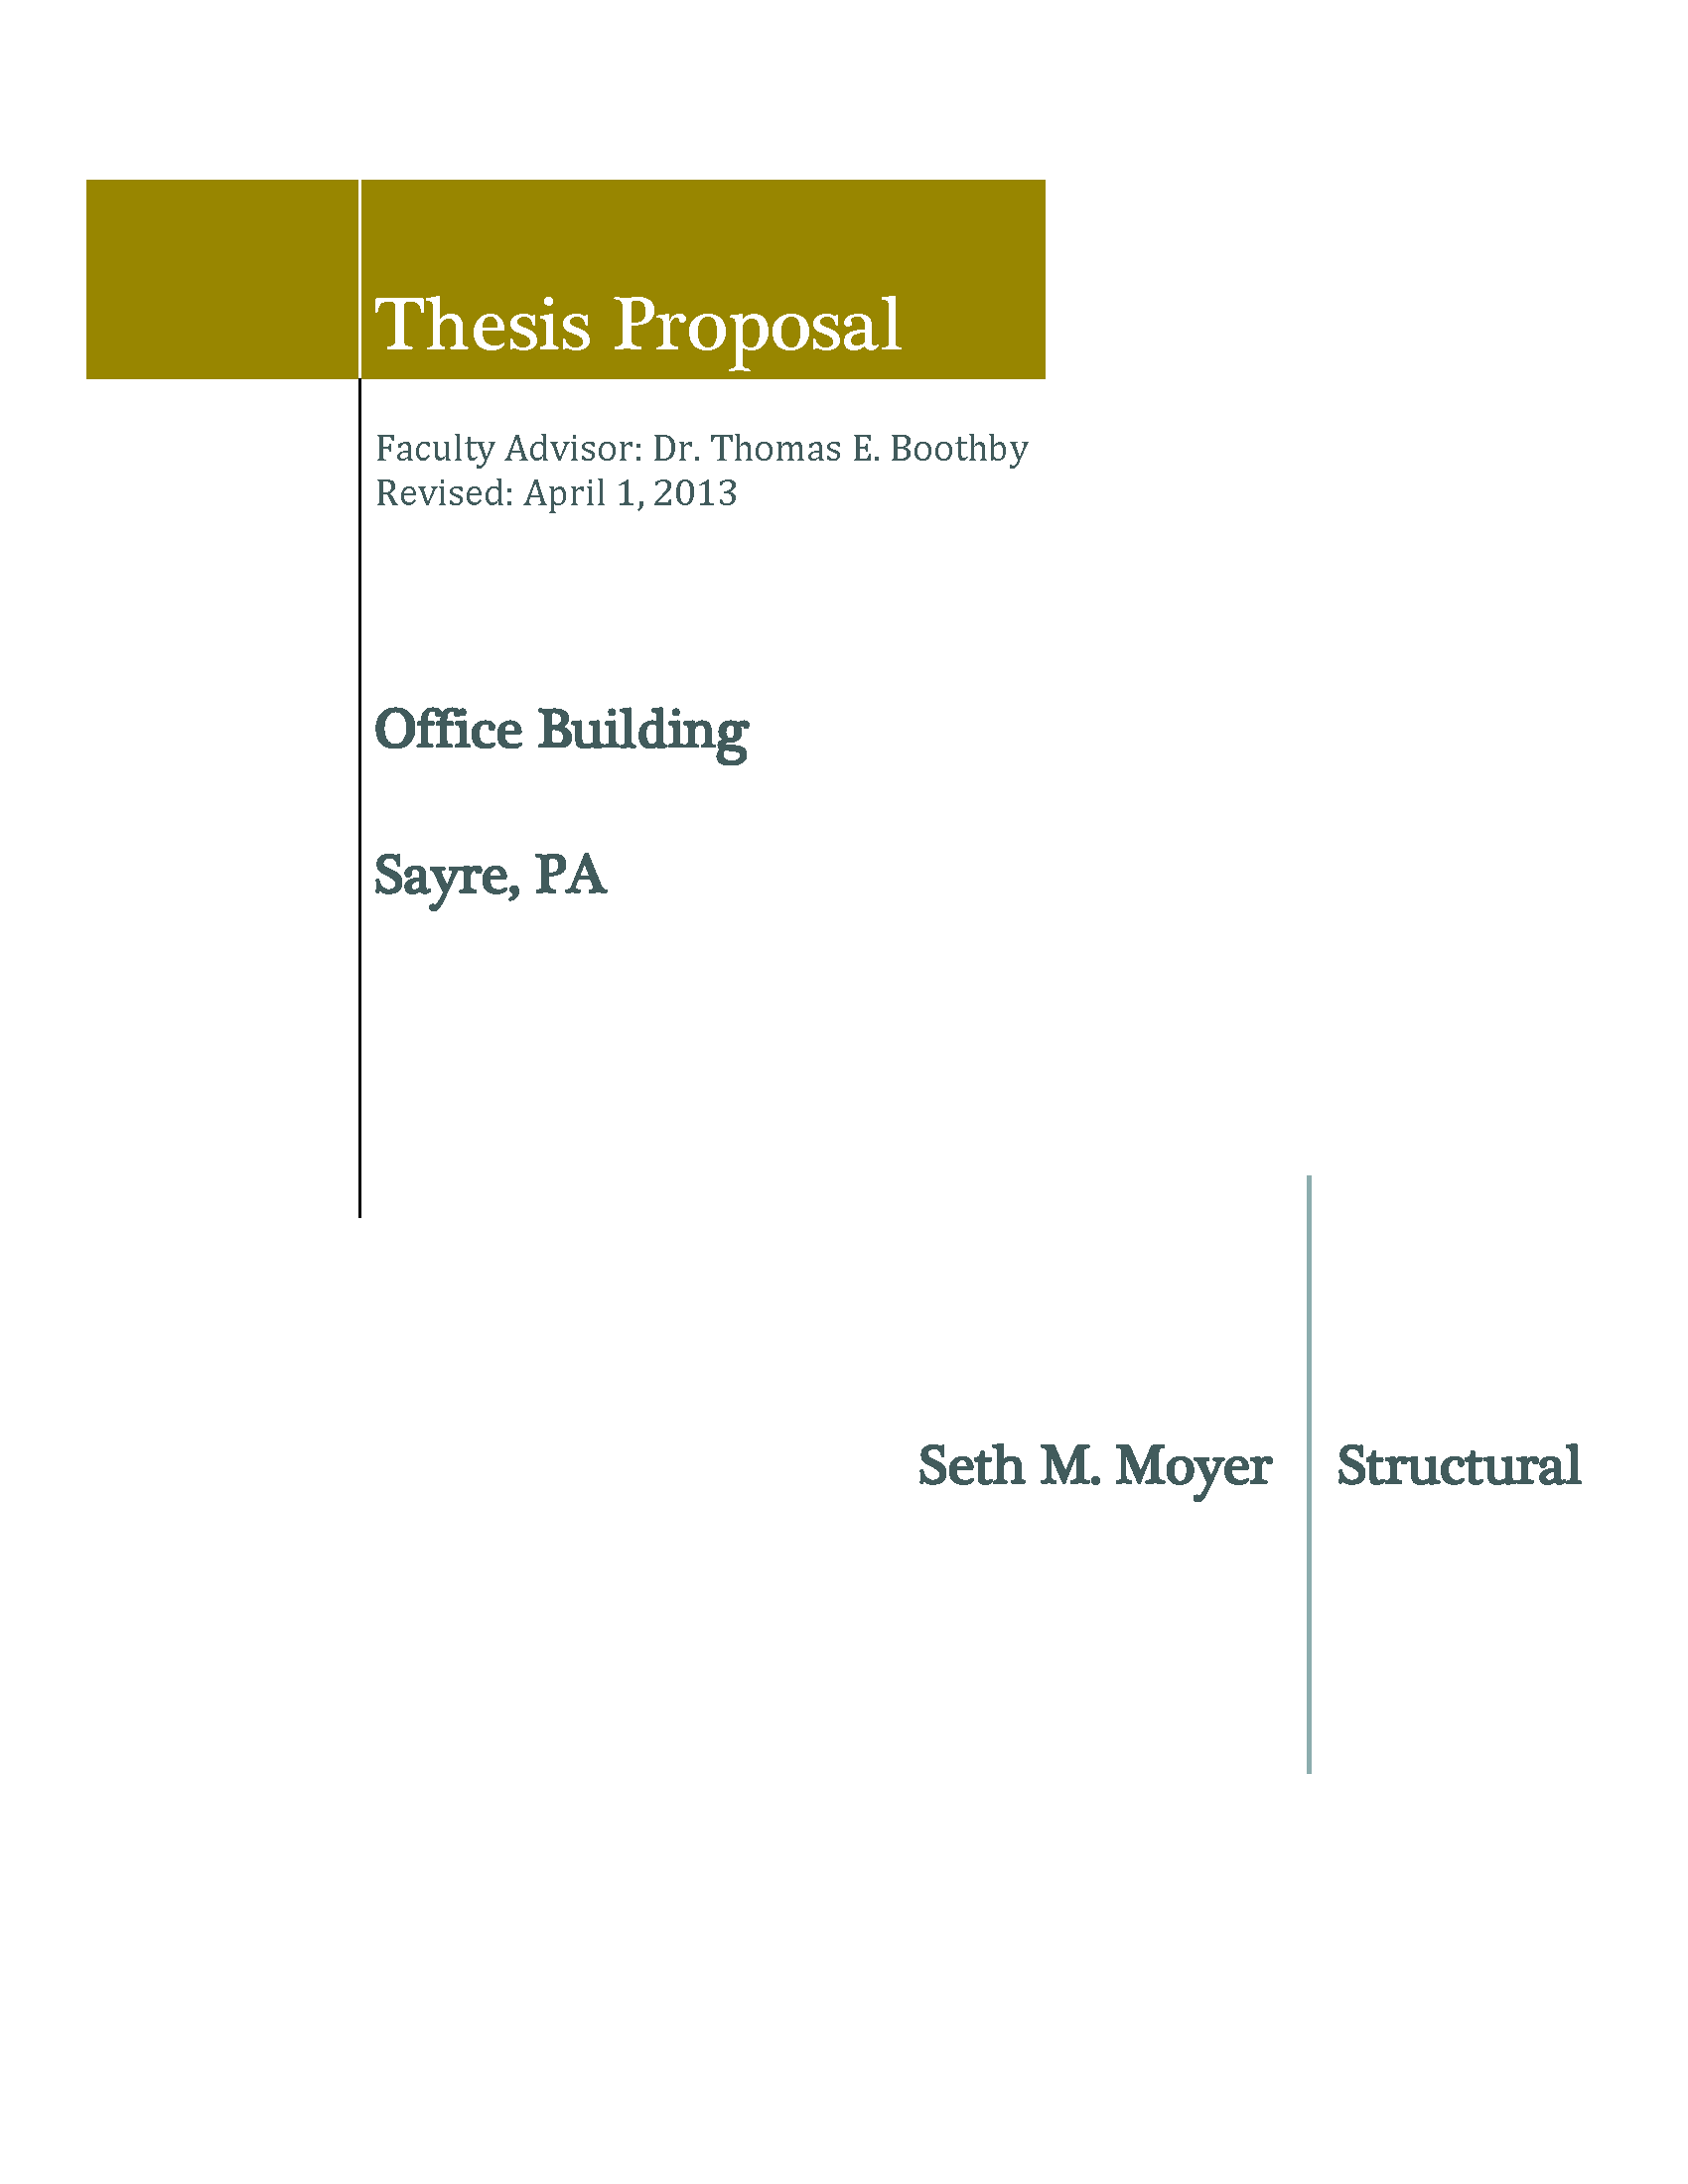 Thesis Proposal - Revision 2